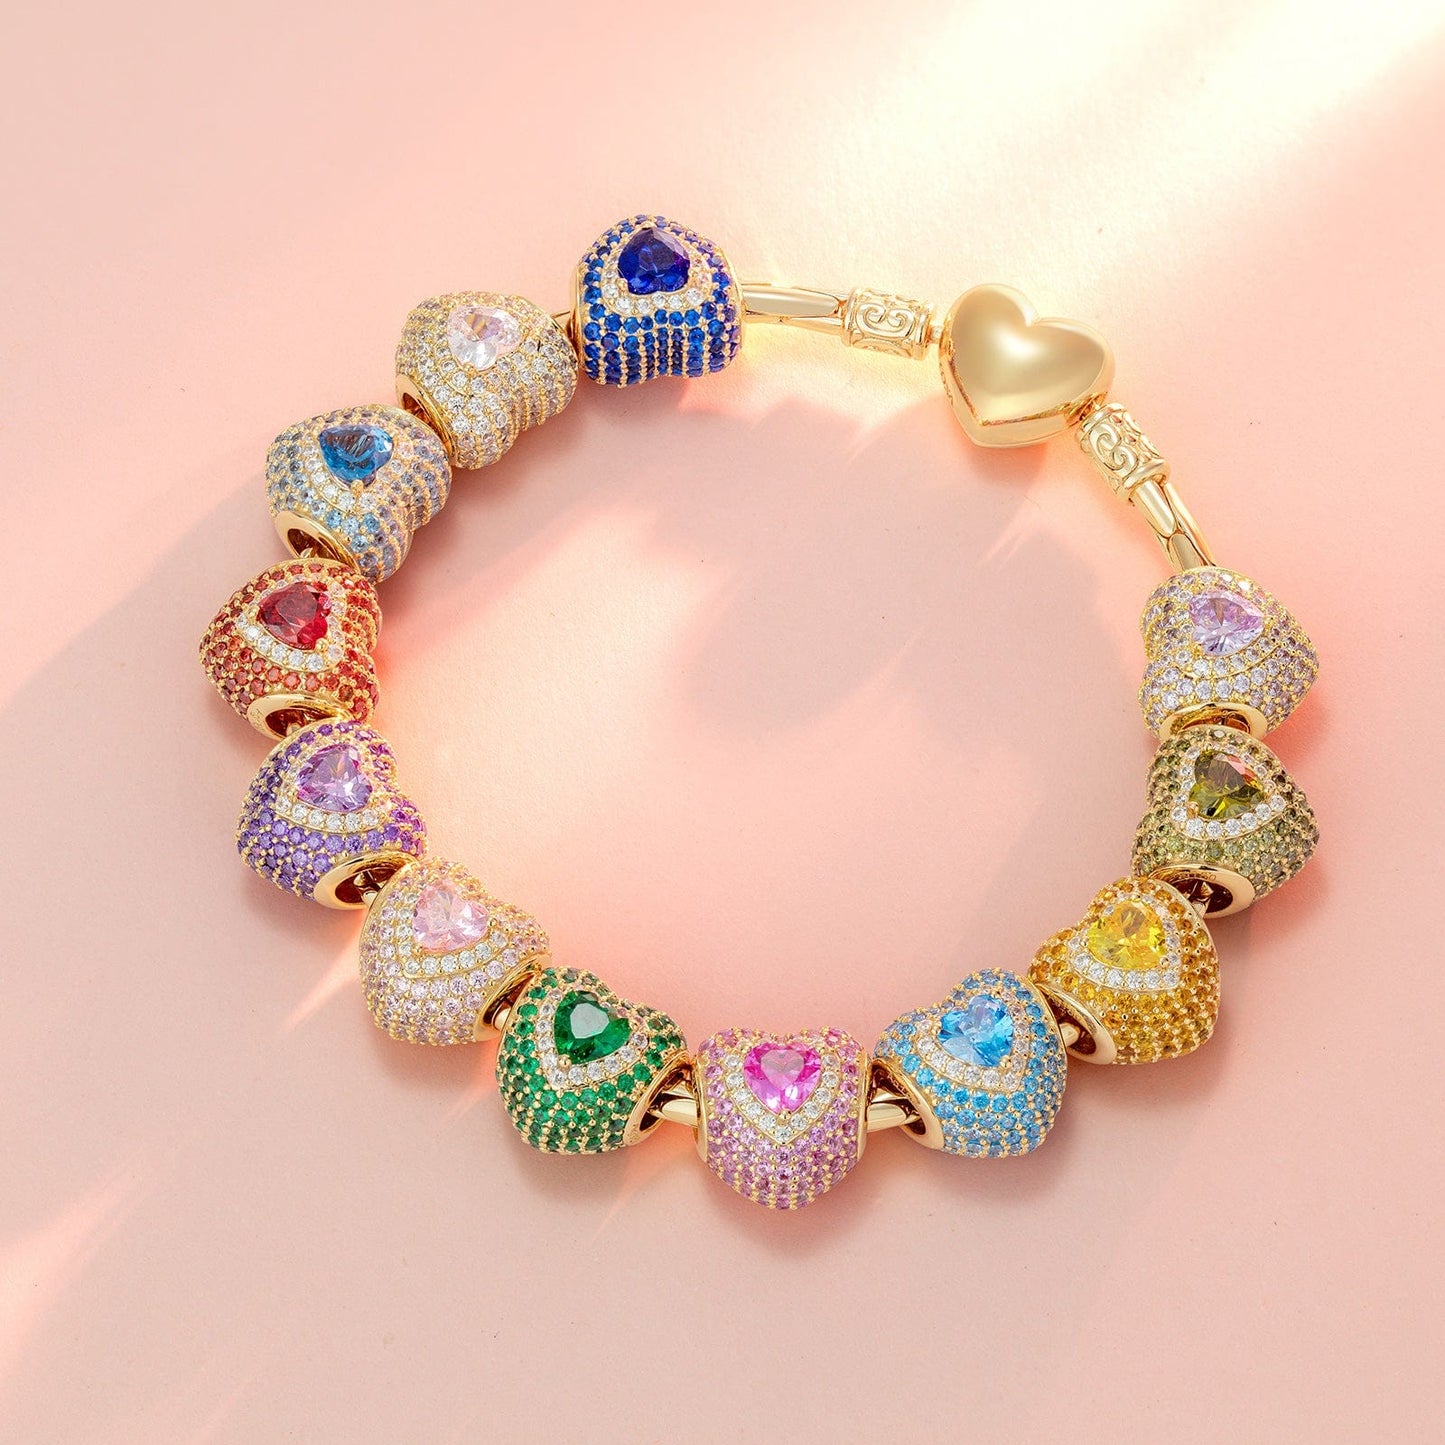 September Love Heart Birthstone Tarnish-resistant Silver Charms With Enamel In 14K Gold Plated